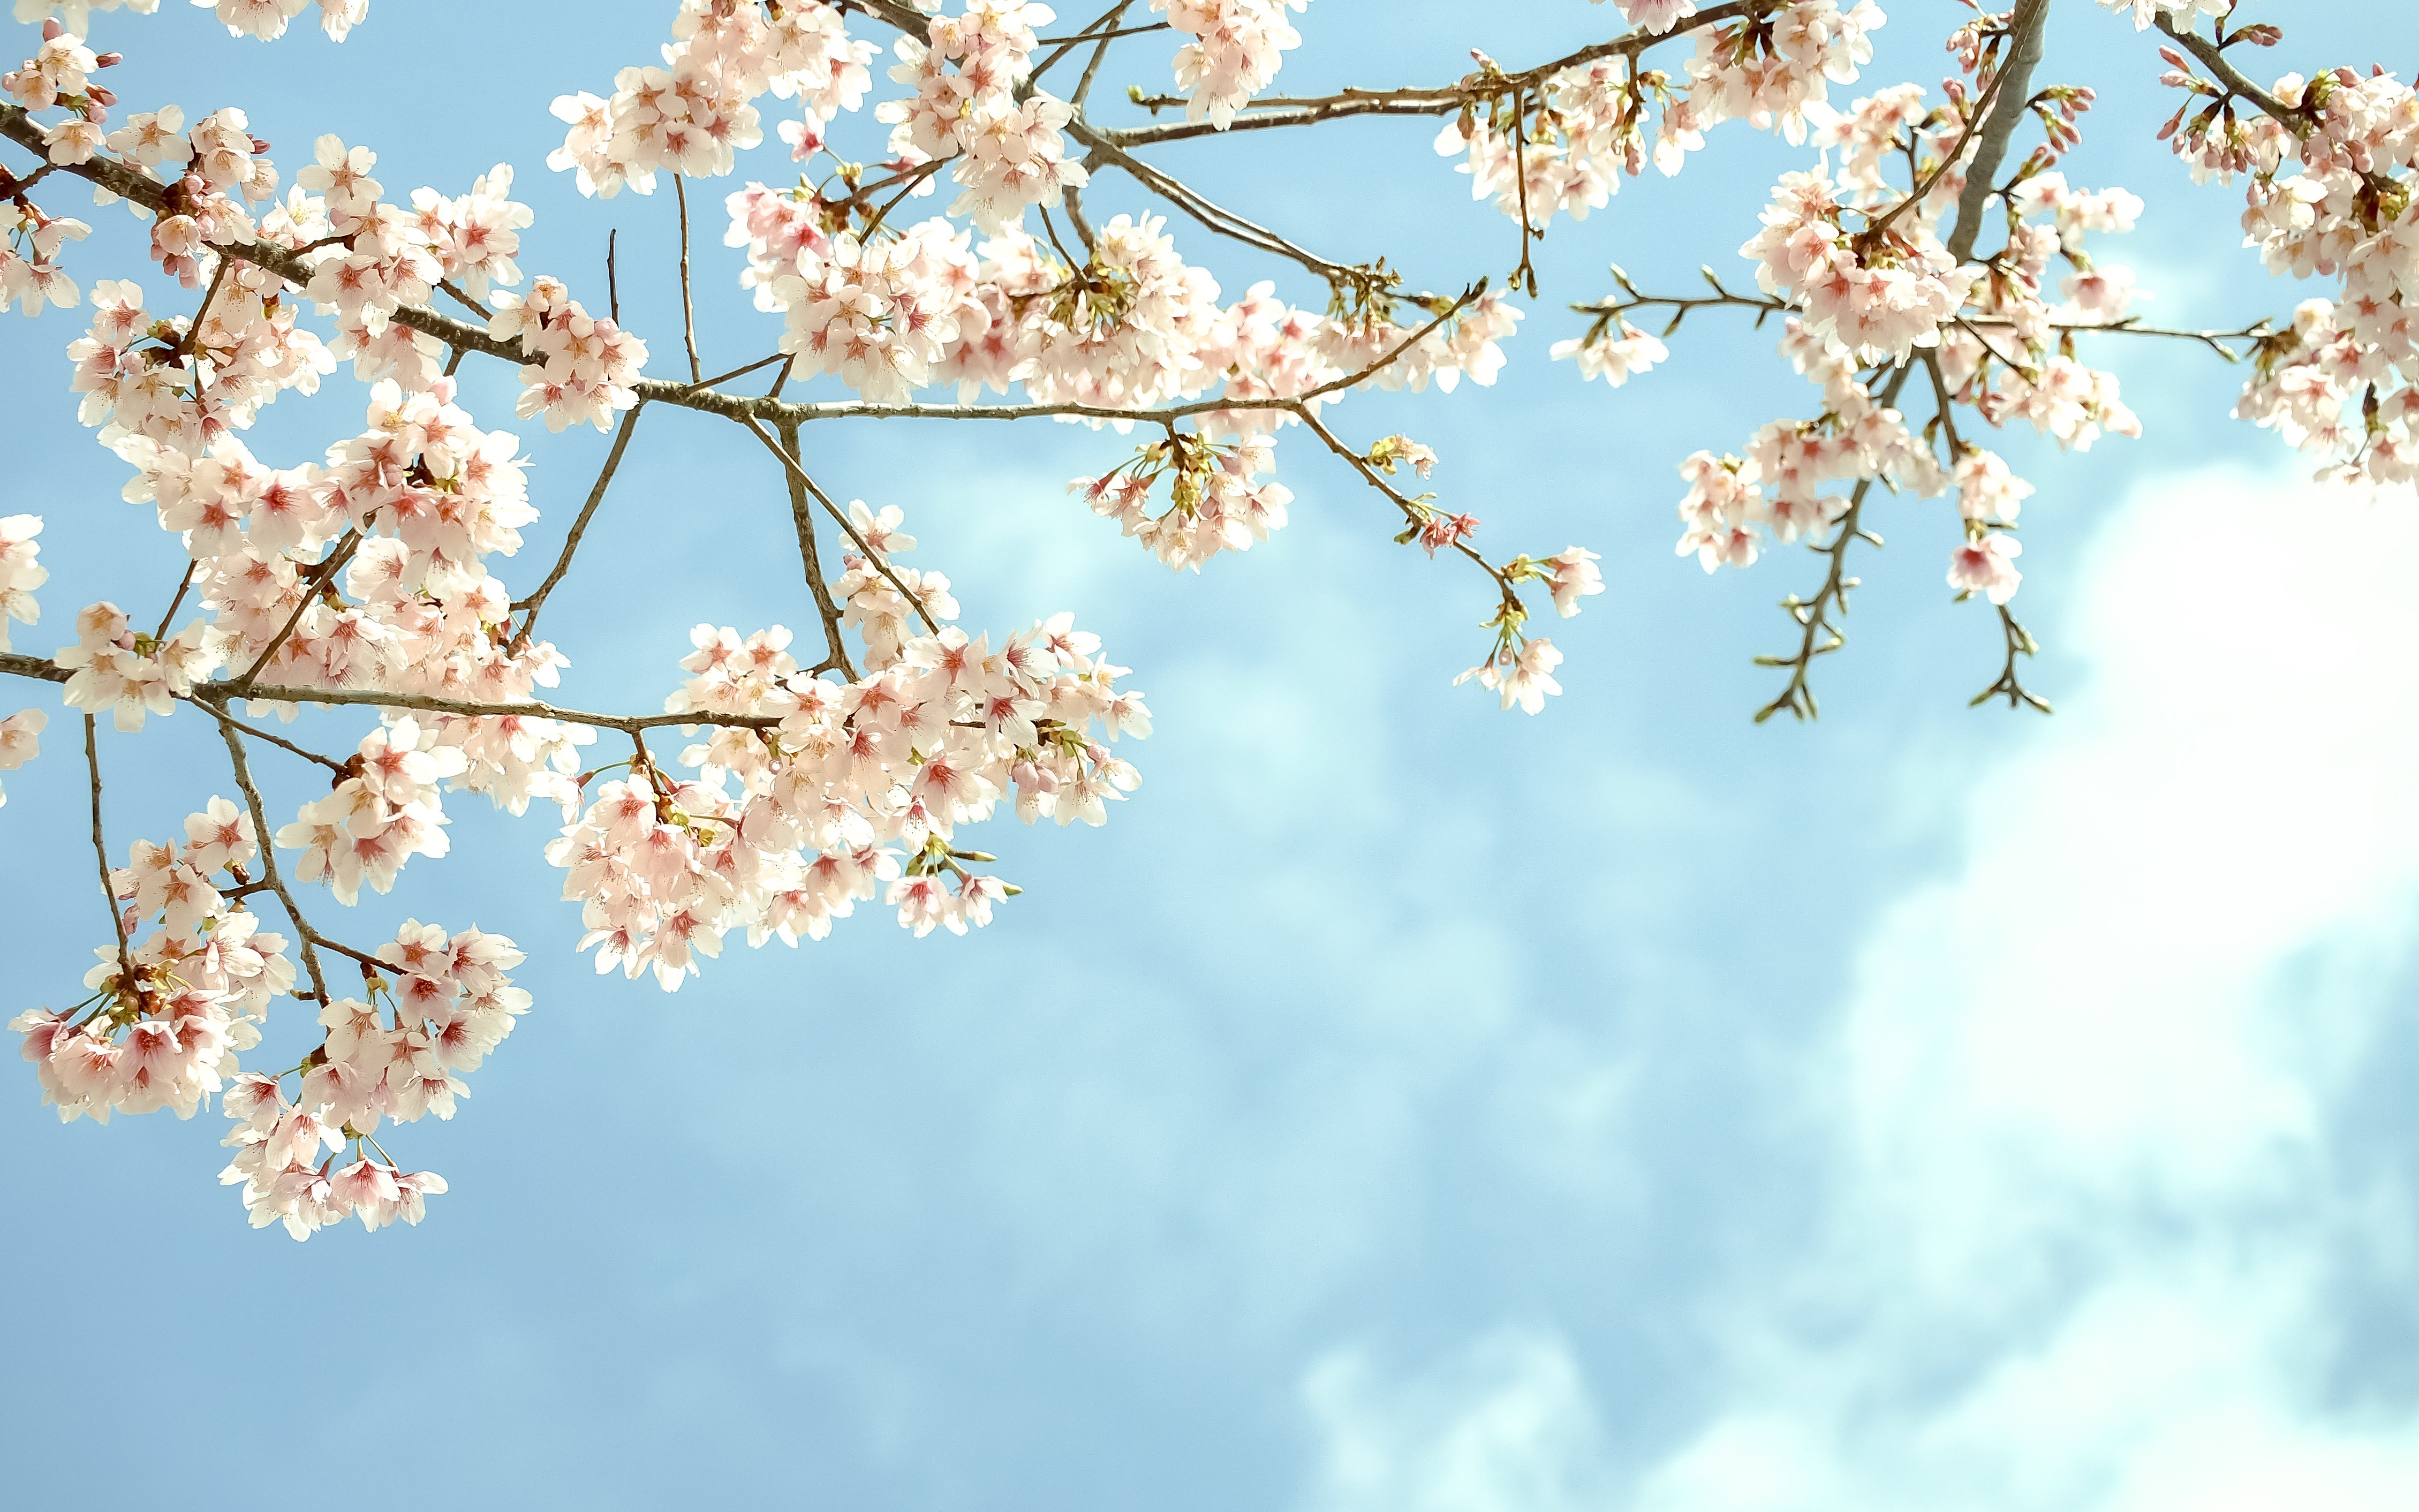 Flowers blooms branches tree wallpaper | 4518x2824 | 354887 ...